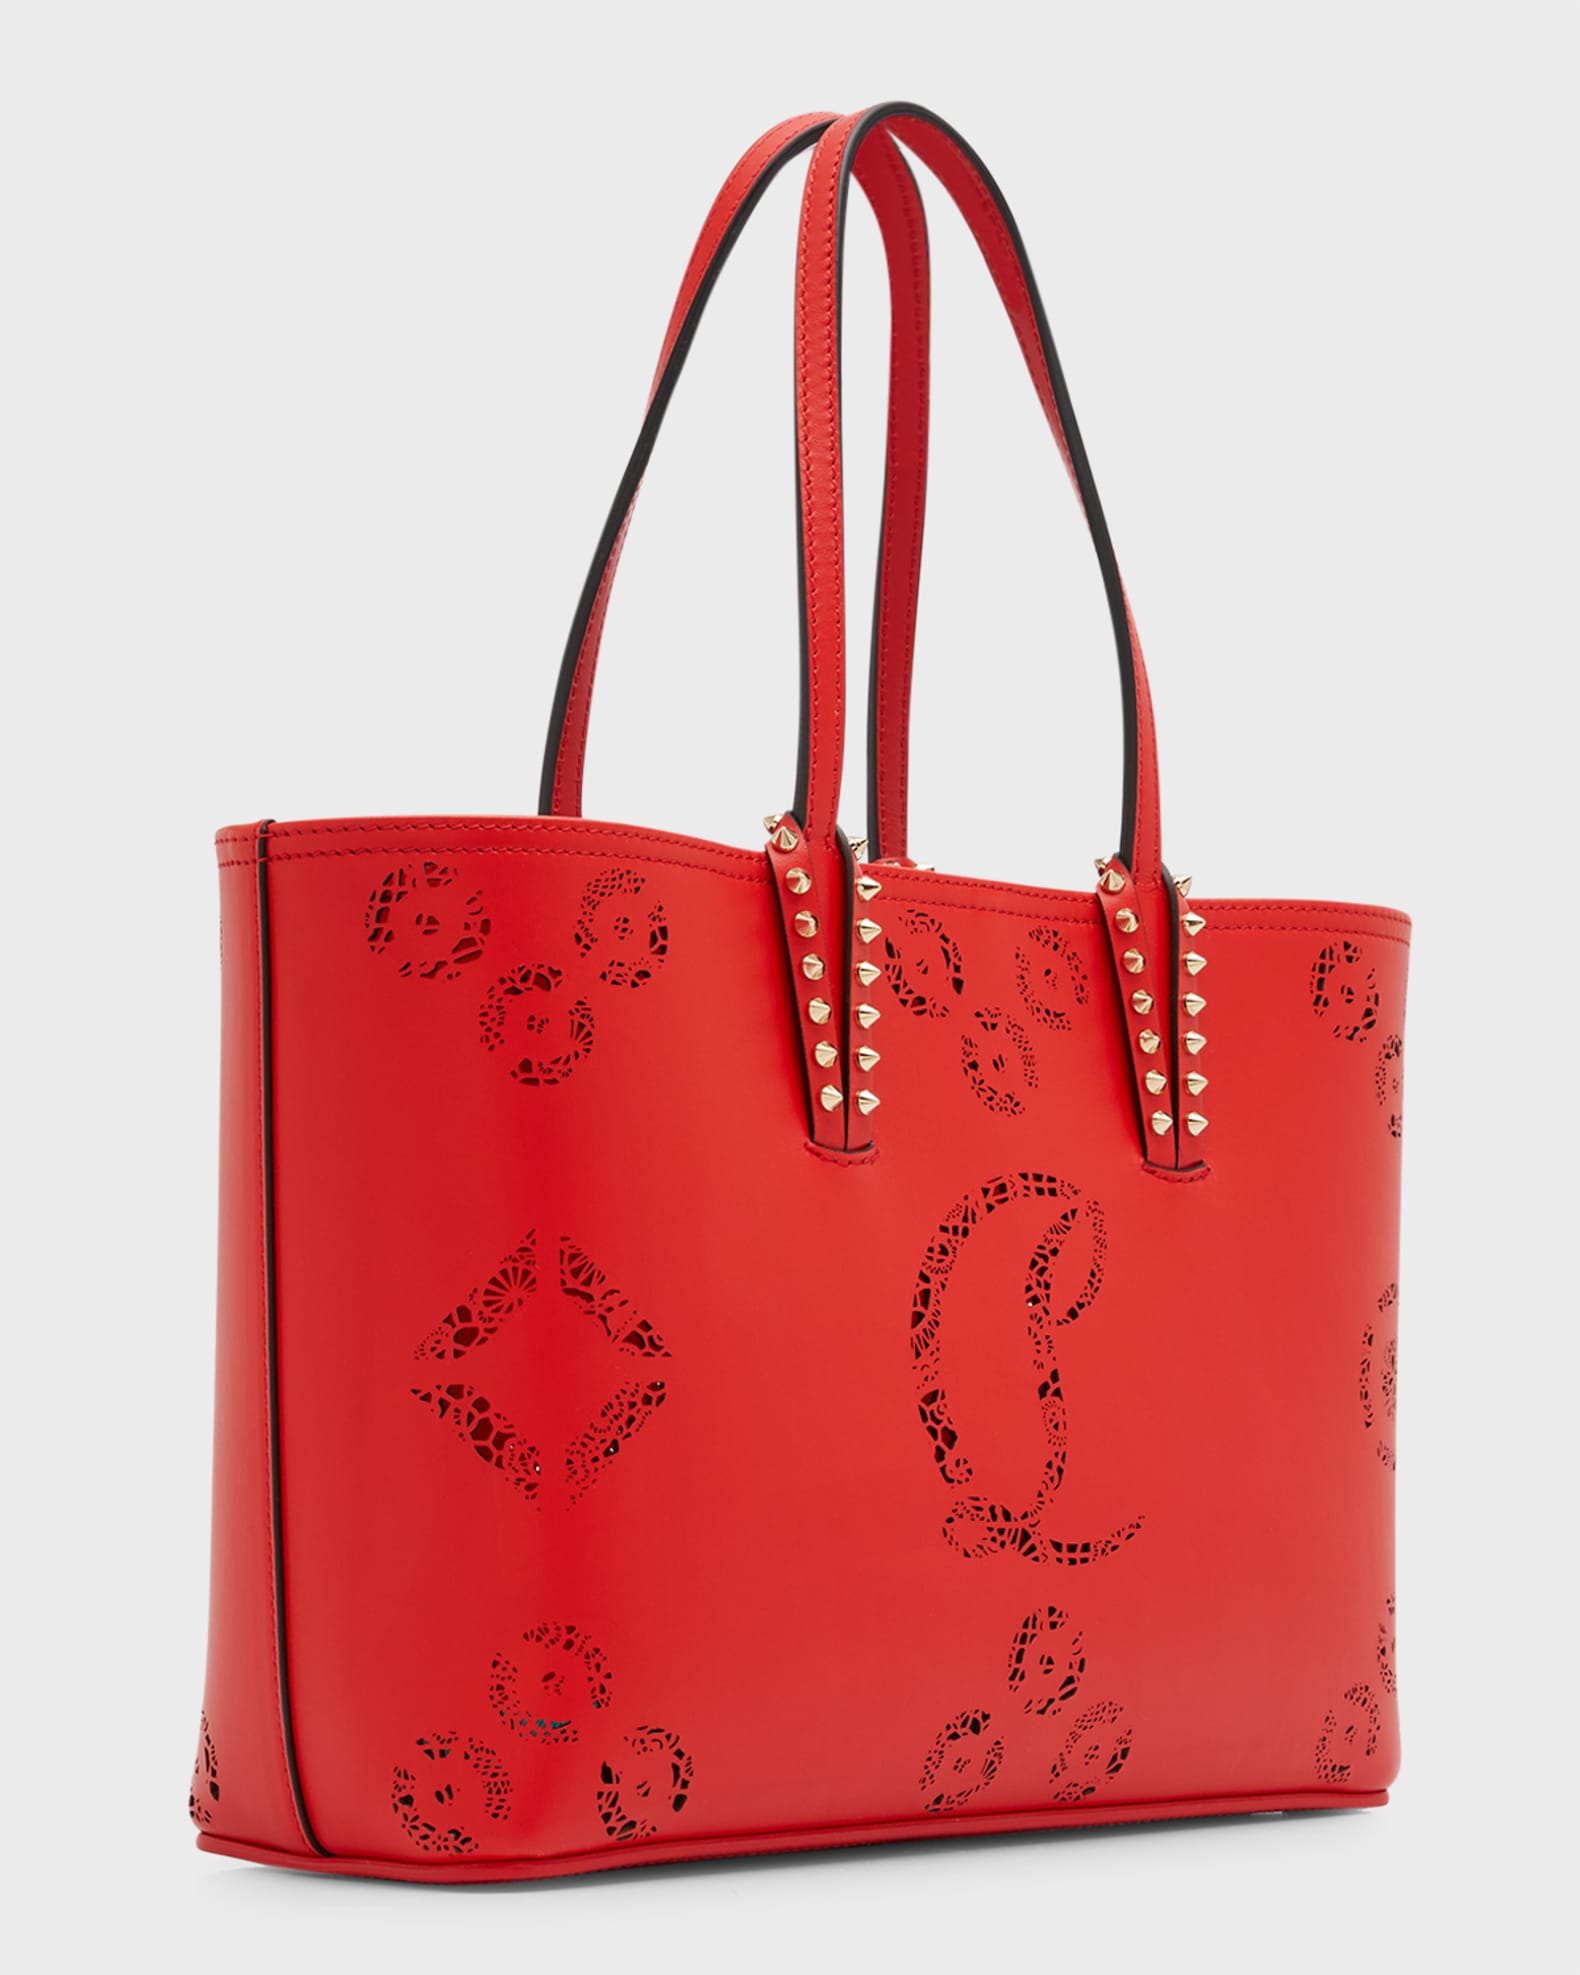 Christian Louboutin Cabata Small Tote in Loubinthesky Perforated ...